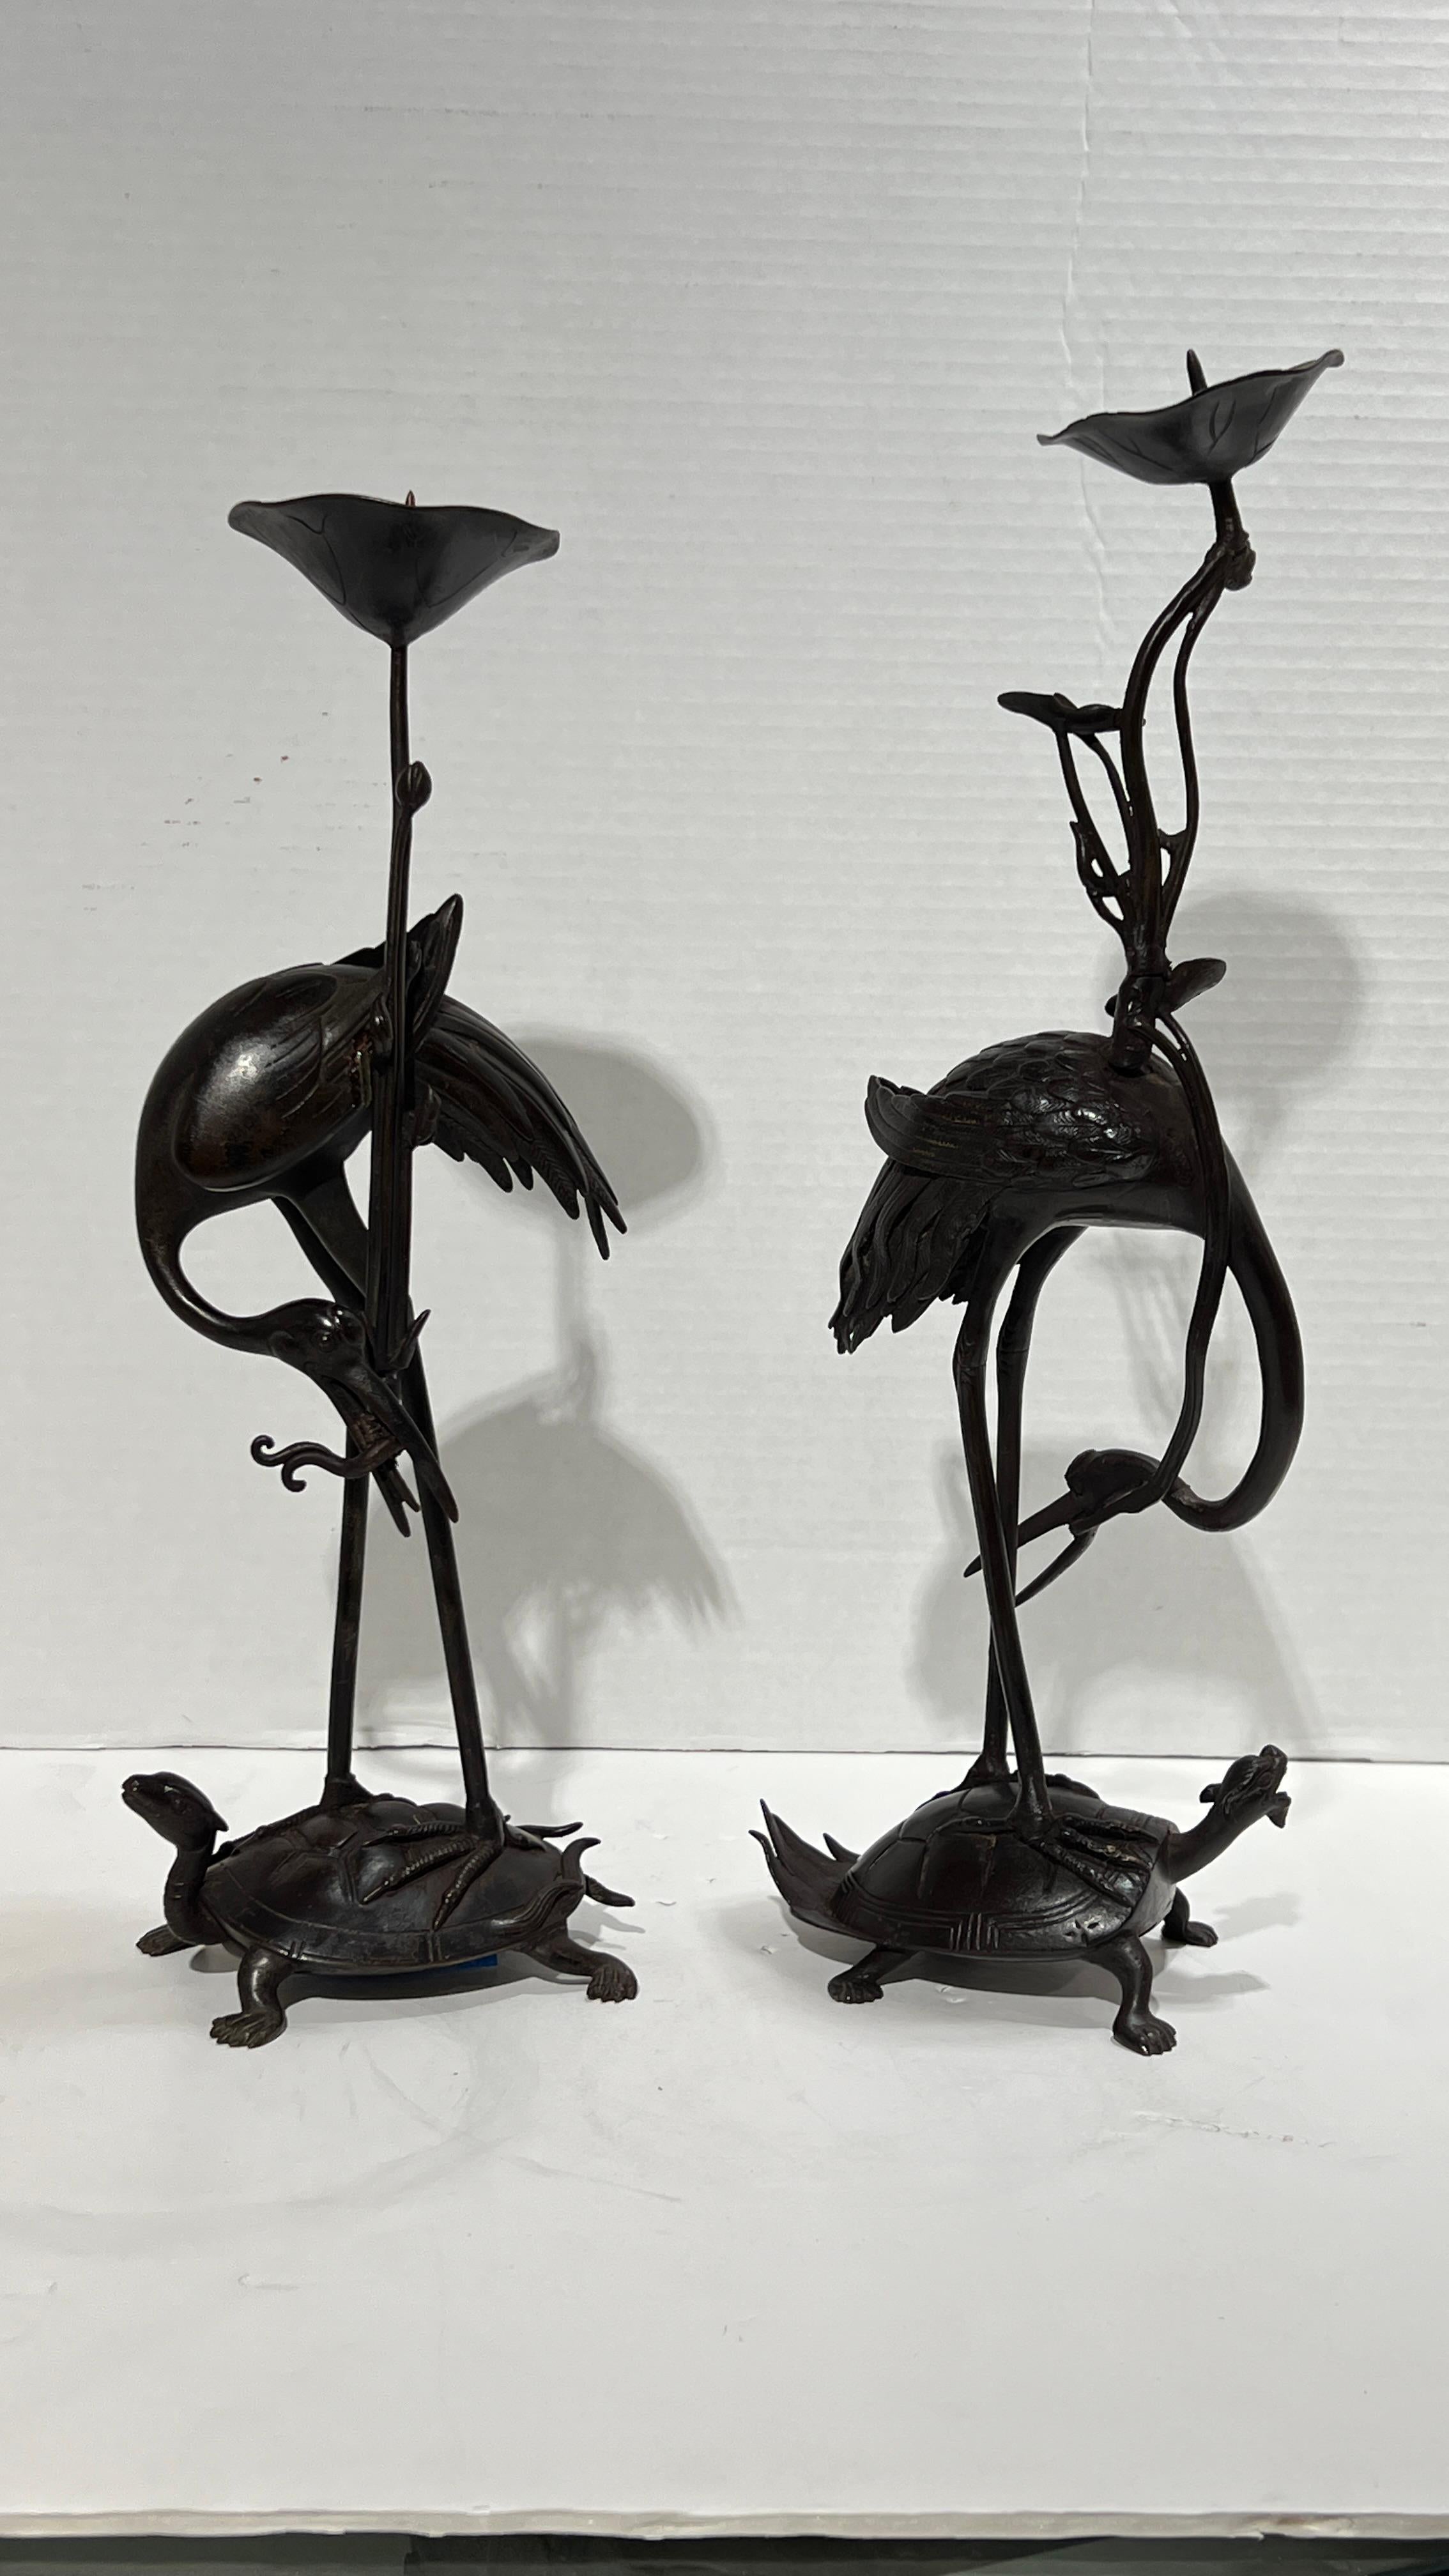 Pair of 19th century Meiji period Japanese candle holders in patinated bronze, fashioned as cranes (or herons) standing on minogame turtles.